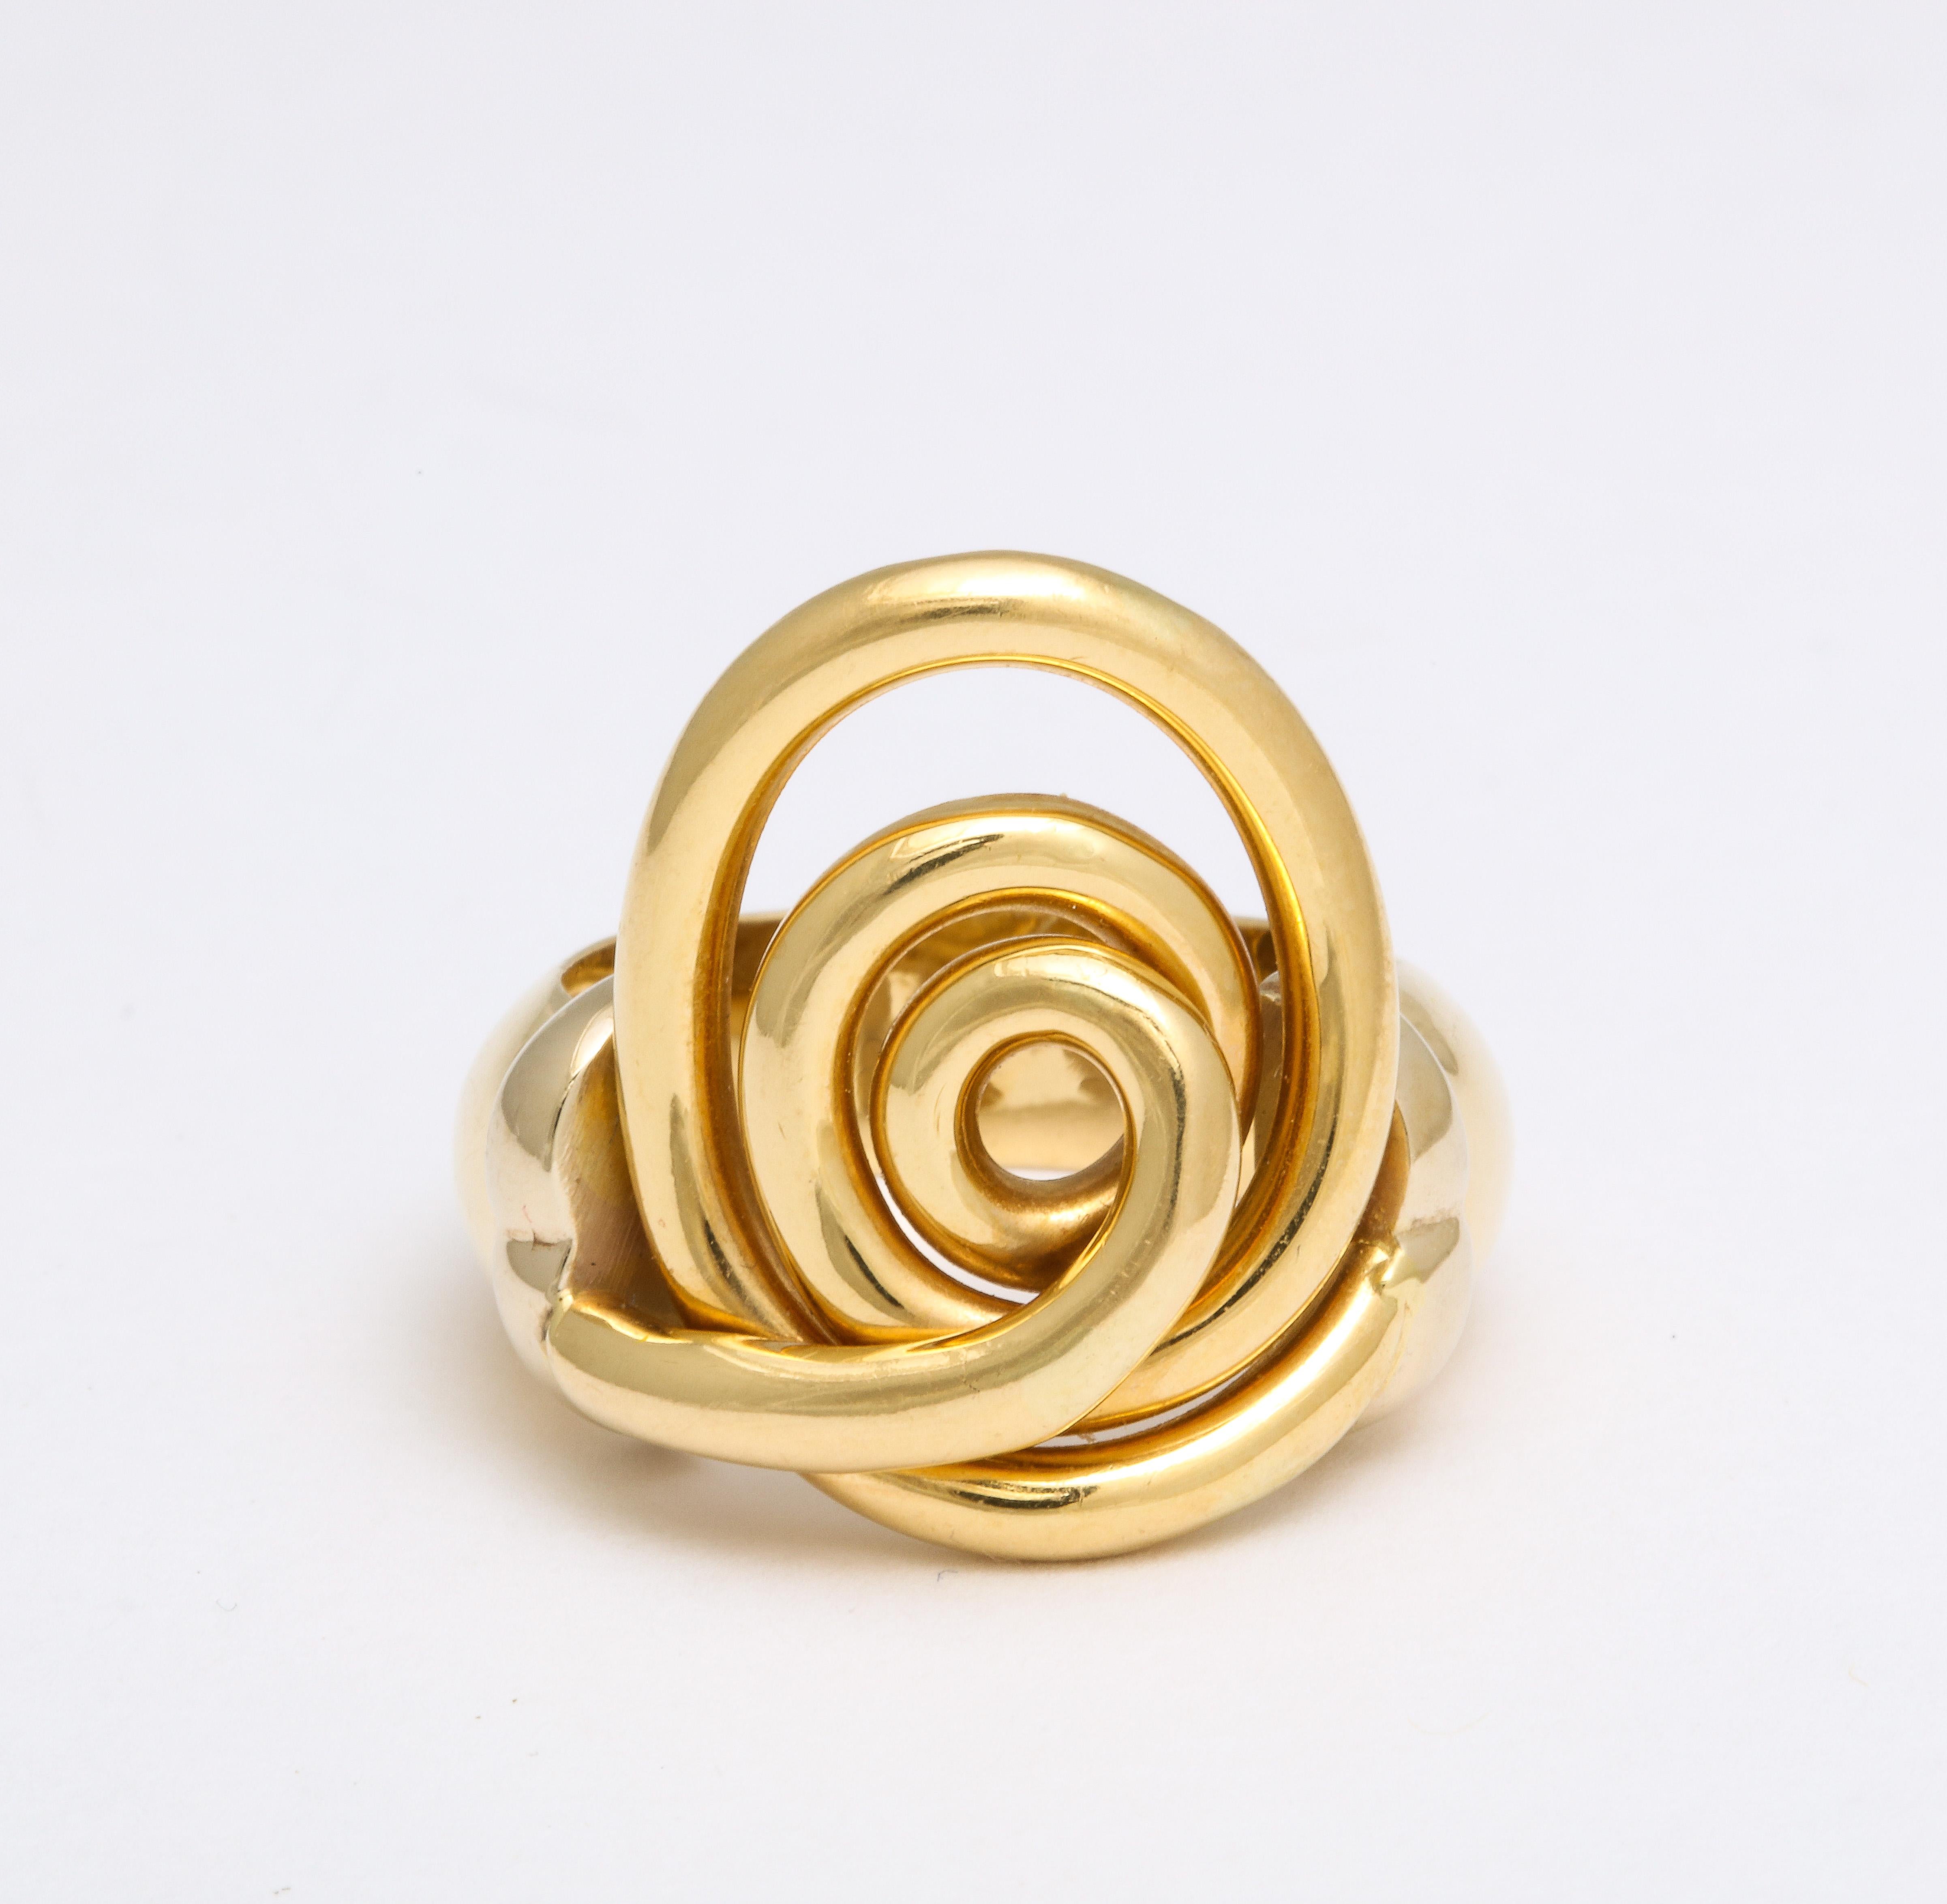 Representing the circle of life, regeneration and evolution of the spirit, the spiral ring in 18 Kt gold has a positive symbolic meaning as well as being an unusual fashion ring. It is a remarkable statement ring that fits the 1970's esthetic,